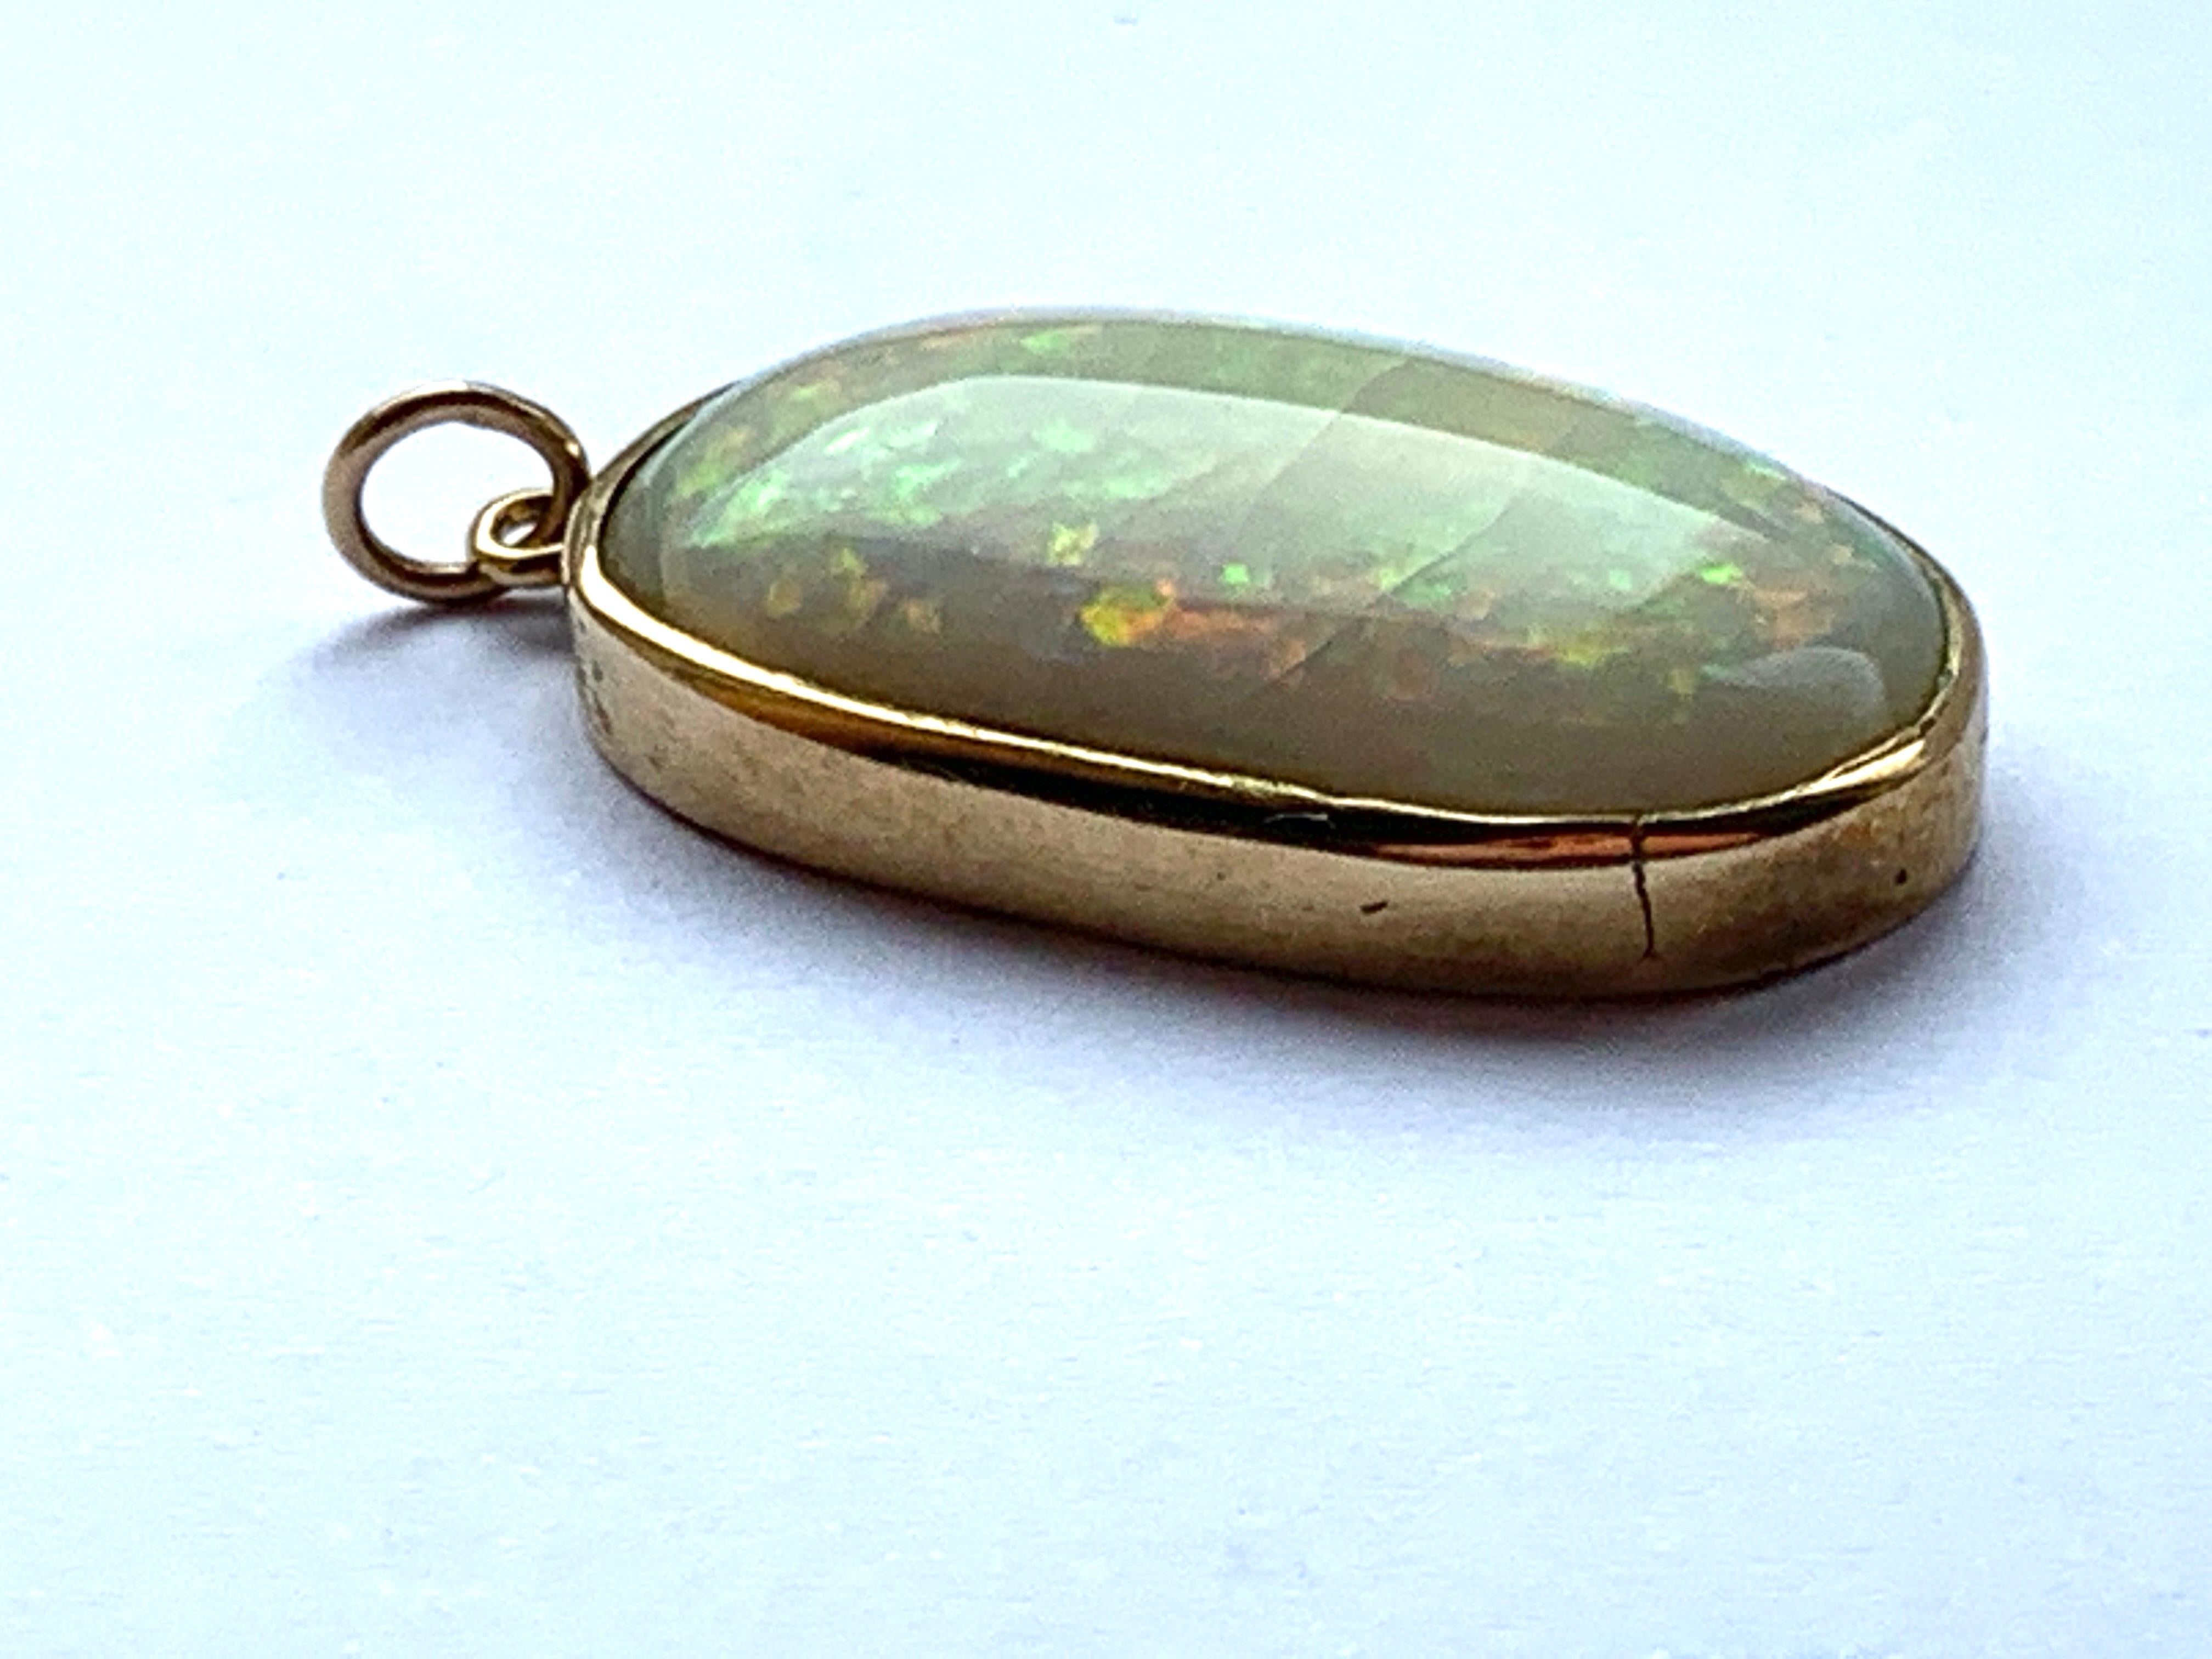 Beautiful Natural Opal
set in 9ct Gold mount
with Crazed internal fractures
Size 2.5cm x 1.5cm x 7mm approx
Weight 4.93 grammes